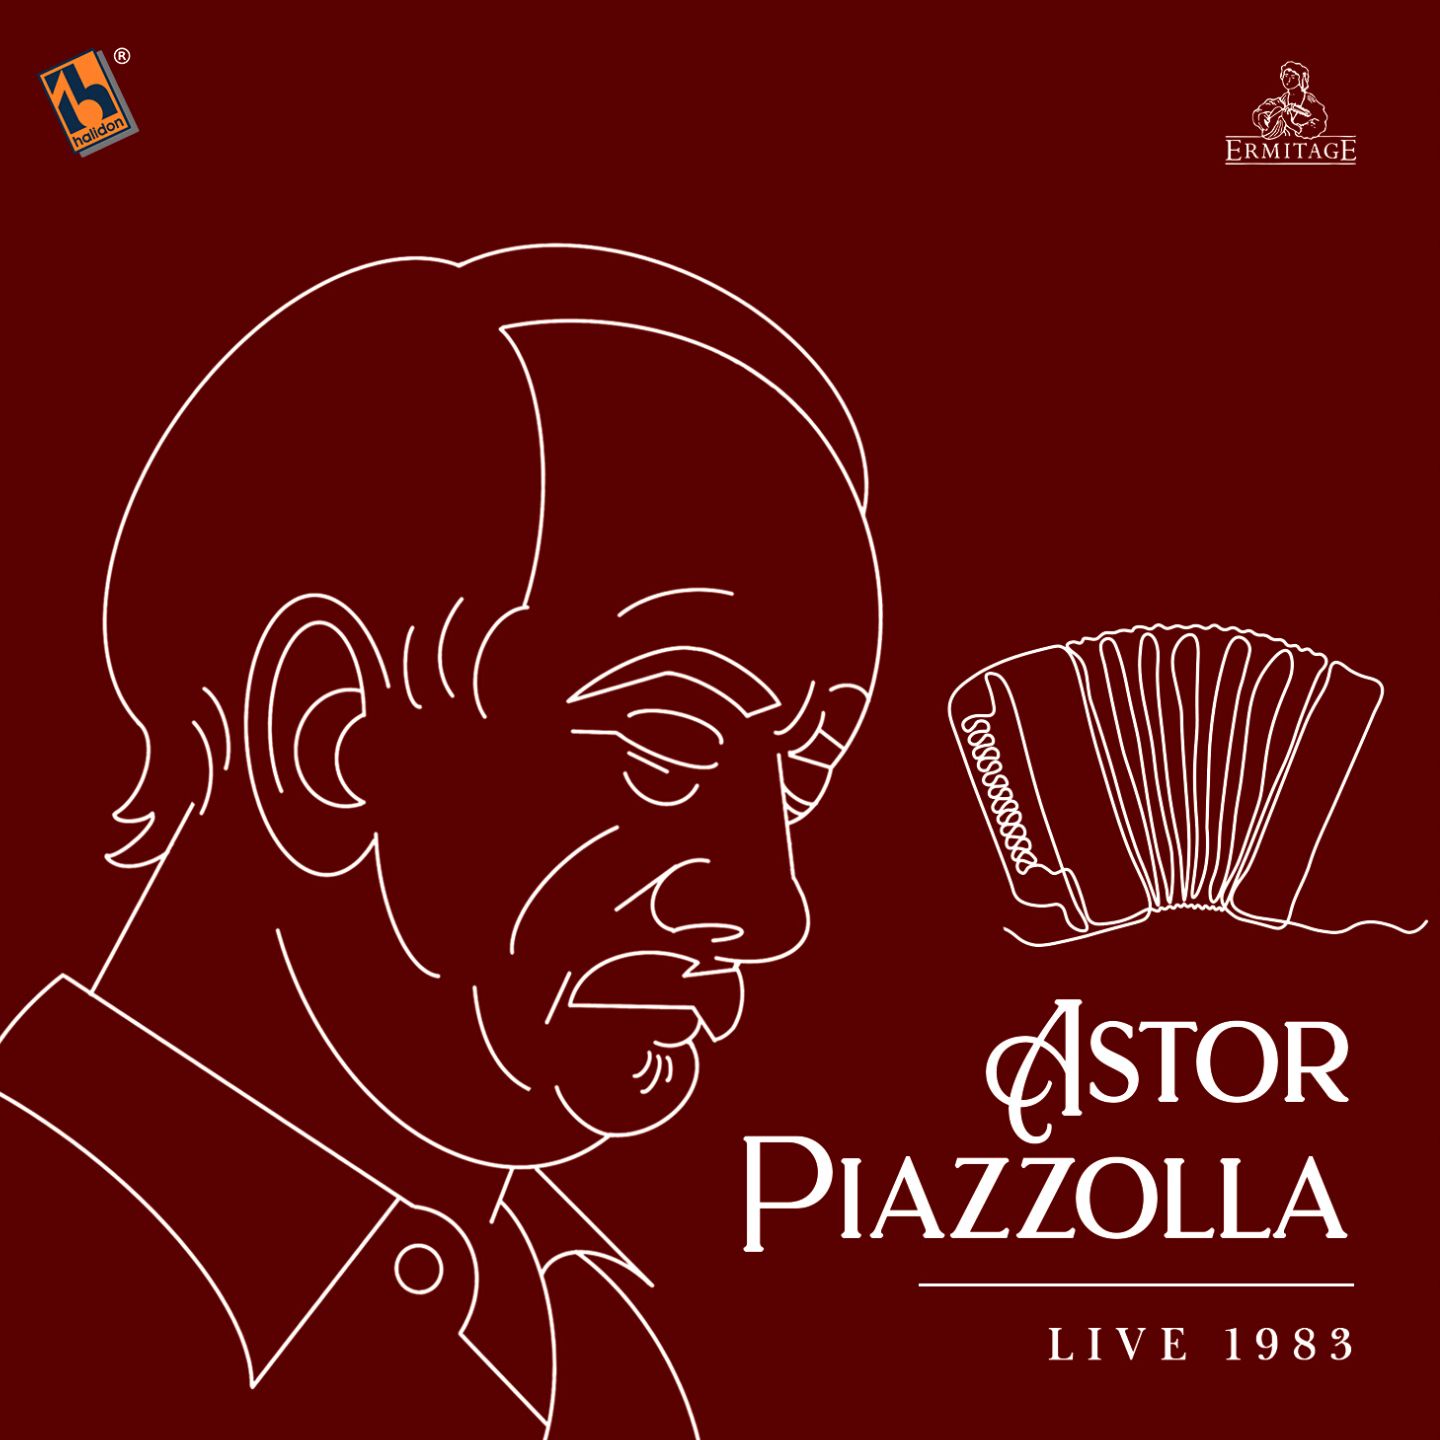 Astor Piazzolla: Live in Lugano, 1983